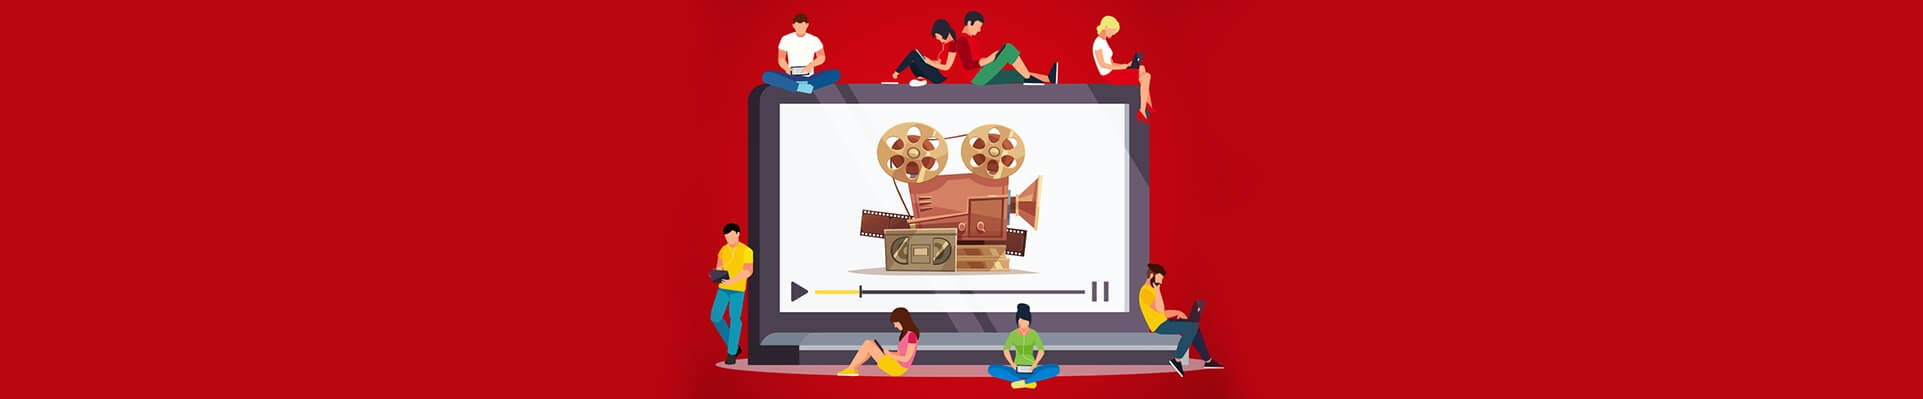 5 REASONS PEOPLE ARE SWITCHING FROM TV TO VOD